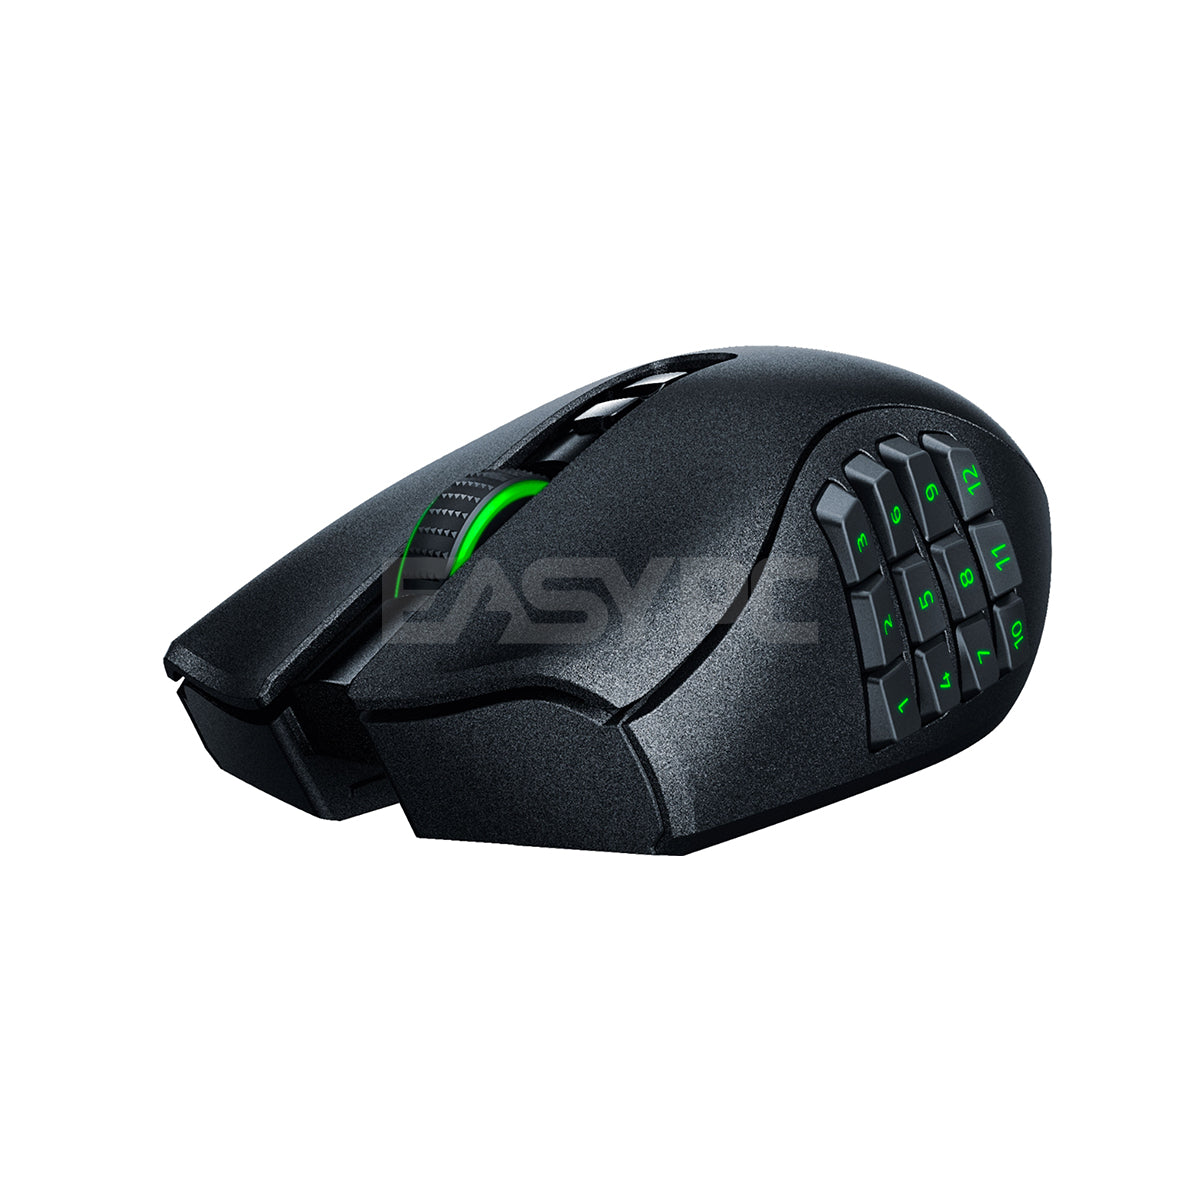 Razer Naga Pro Modular Wireless Gaming Mouse with Swappable Side Plate w/ 2, 6, 12 Button Configurations, Focus+ 20K DPI Optical Sensor Fastest Gaming Mouse RZ01-03420100-R3A1 1ION RARZ2192